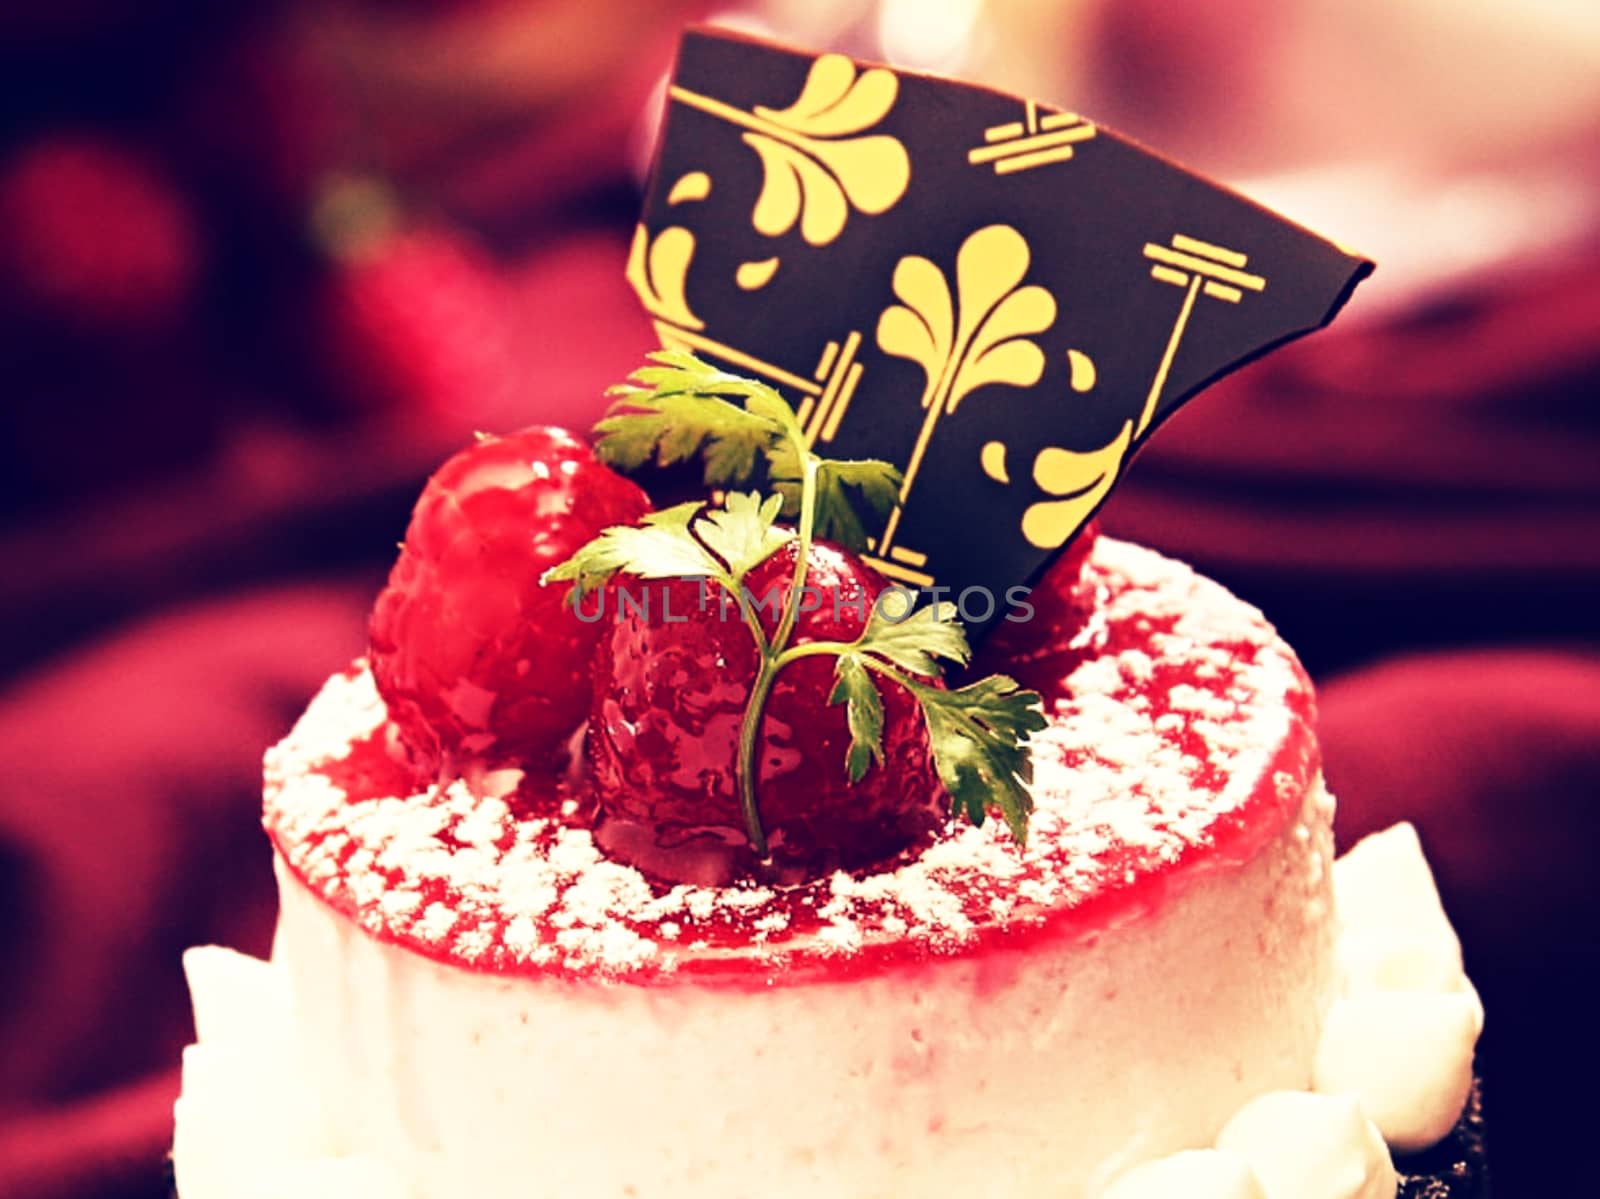 Soft focus of a cake topped with re berries and chocolate.